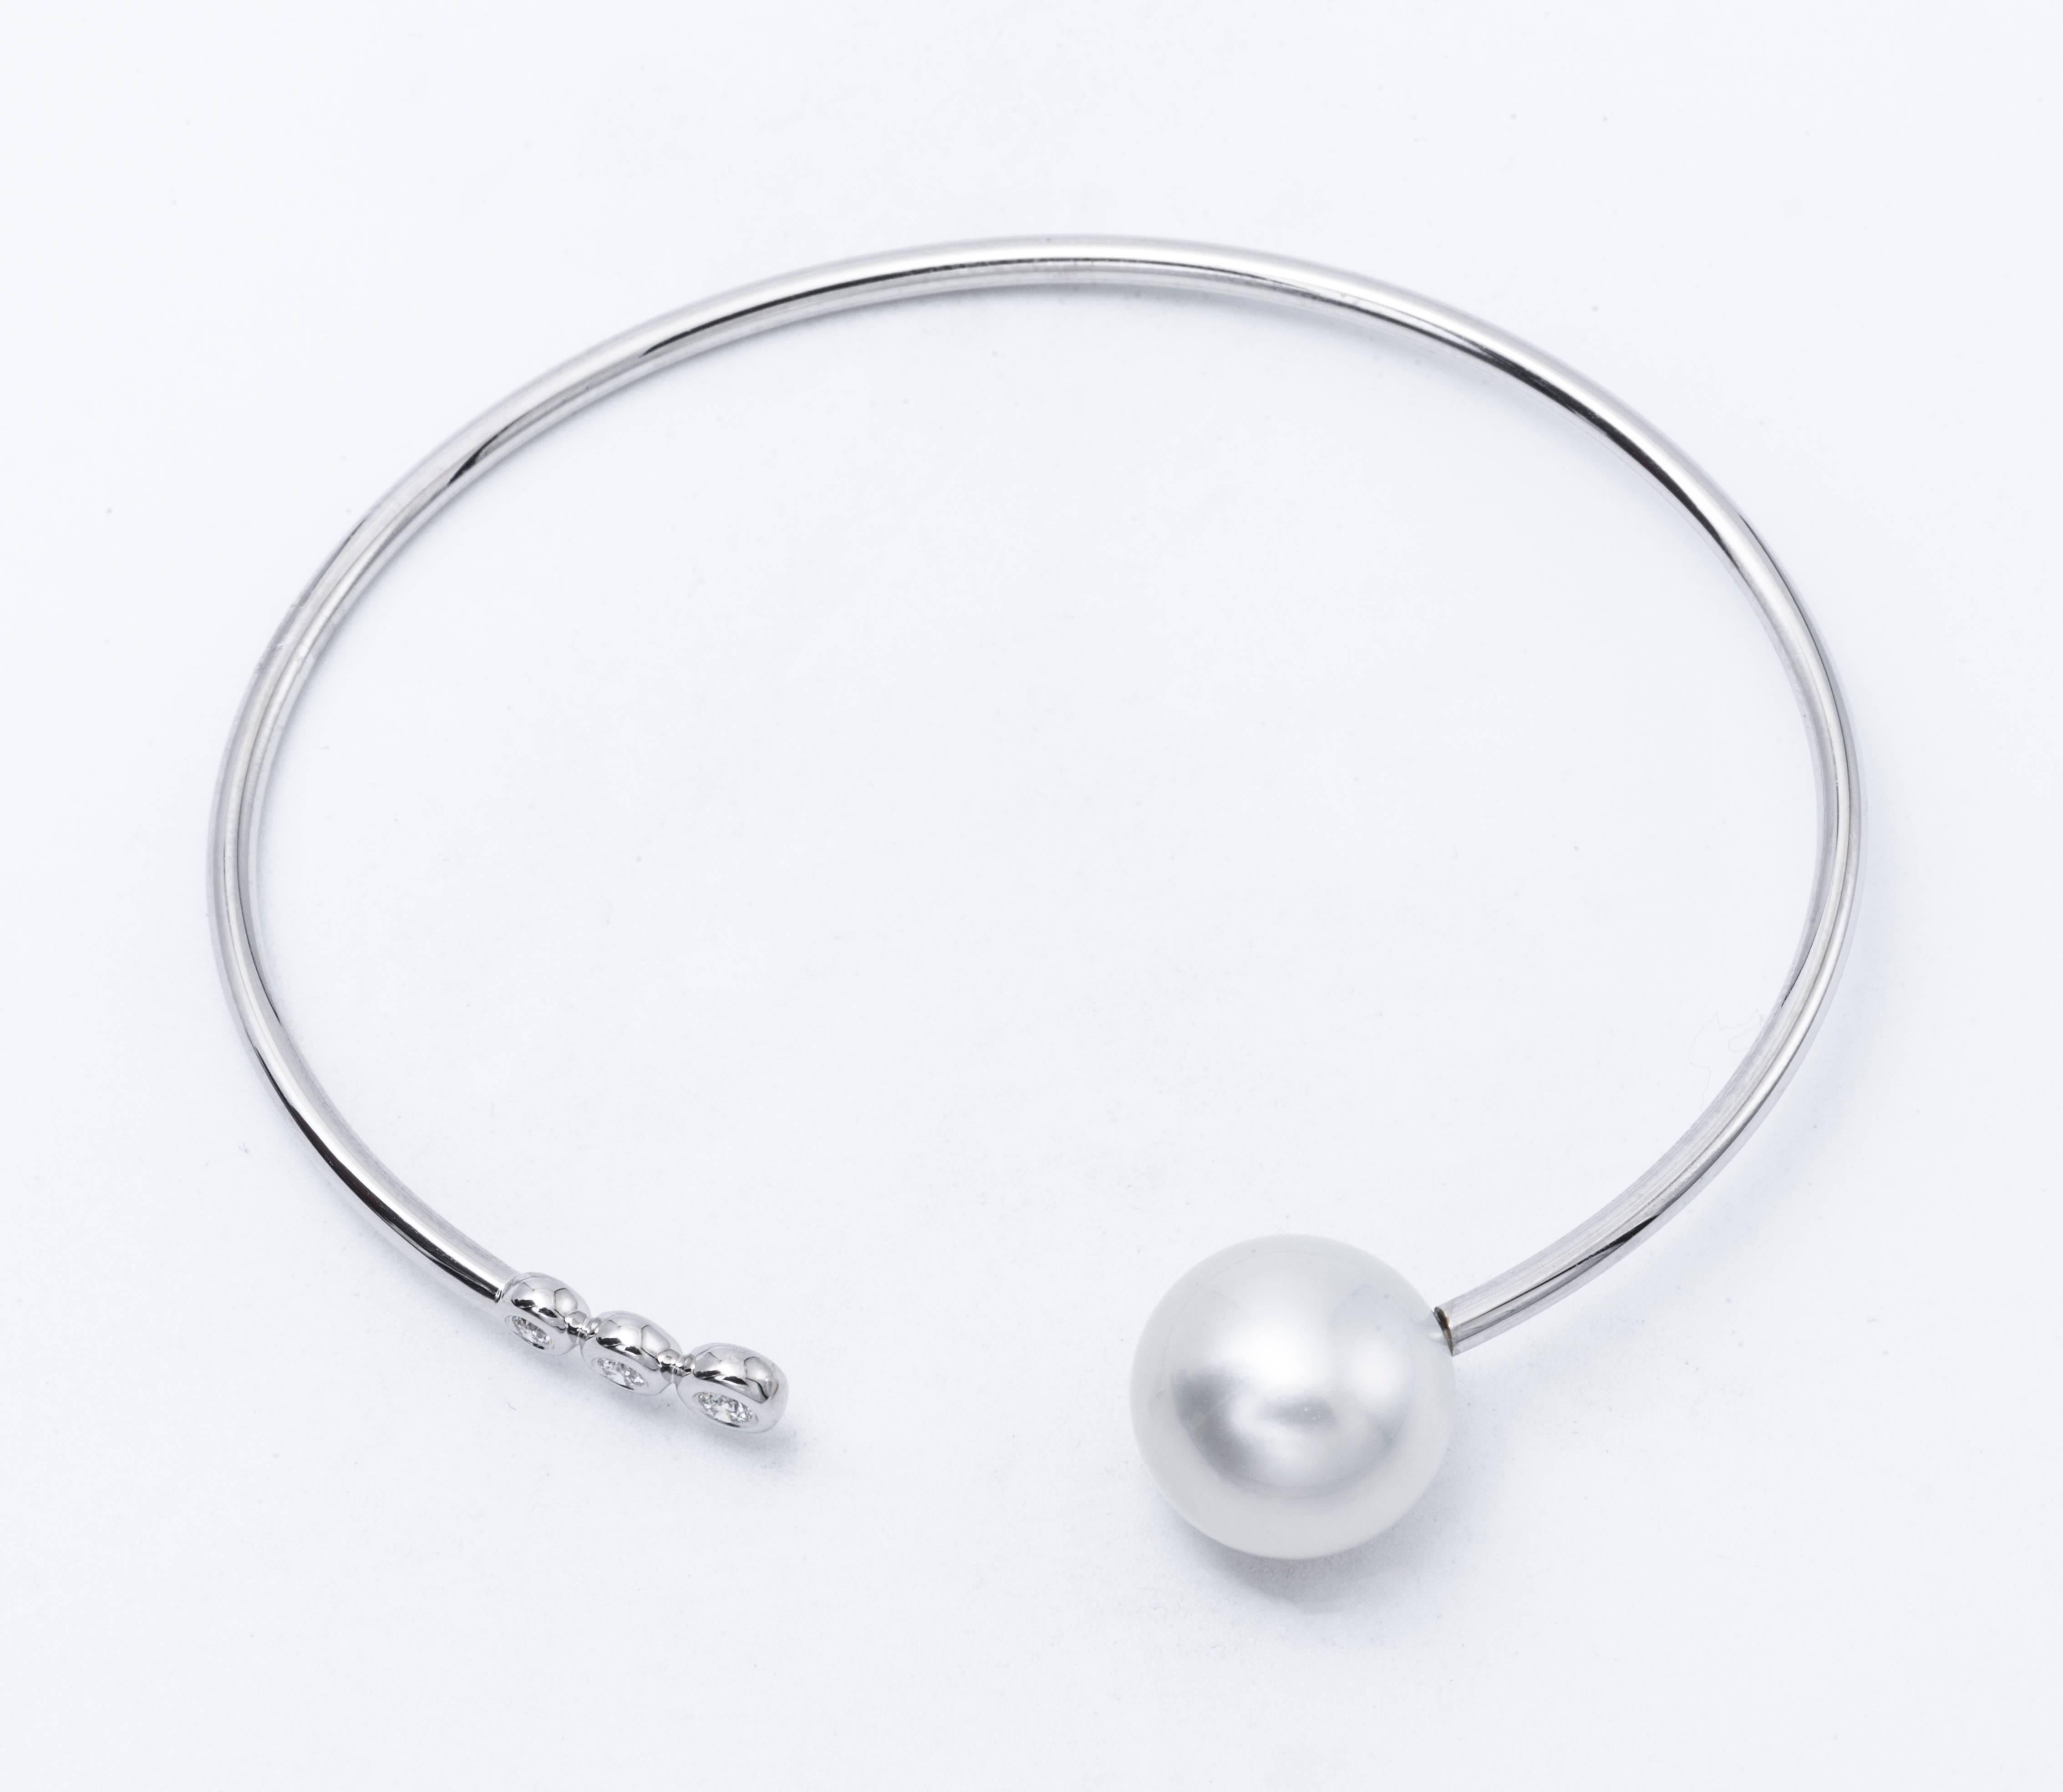 18K White gold open bracelet featuring one South Sea Pearl measuring 11-12 mm and three diamonds weighing 0.10 Carats.
Color G-H
Clarity SI

Pearls can be changed to Pink, Tahitian or Golden upon request. Price subject to change.

